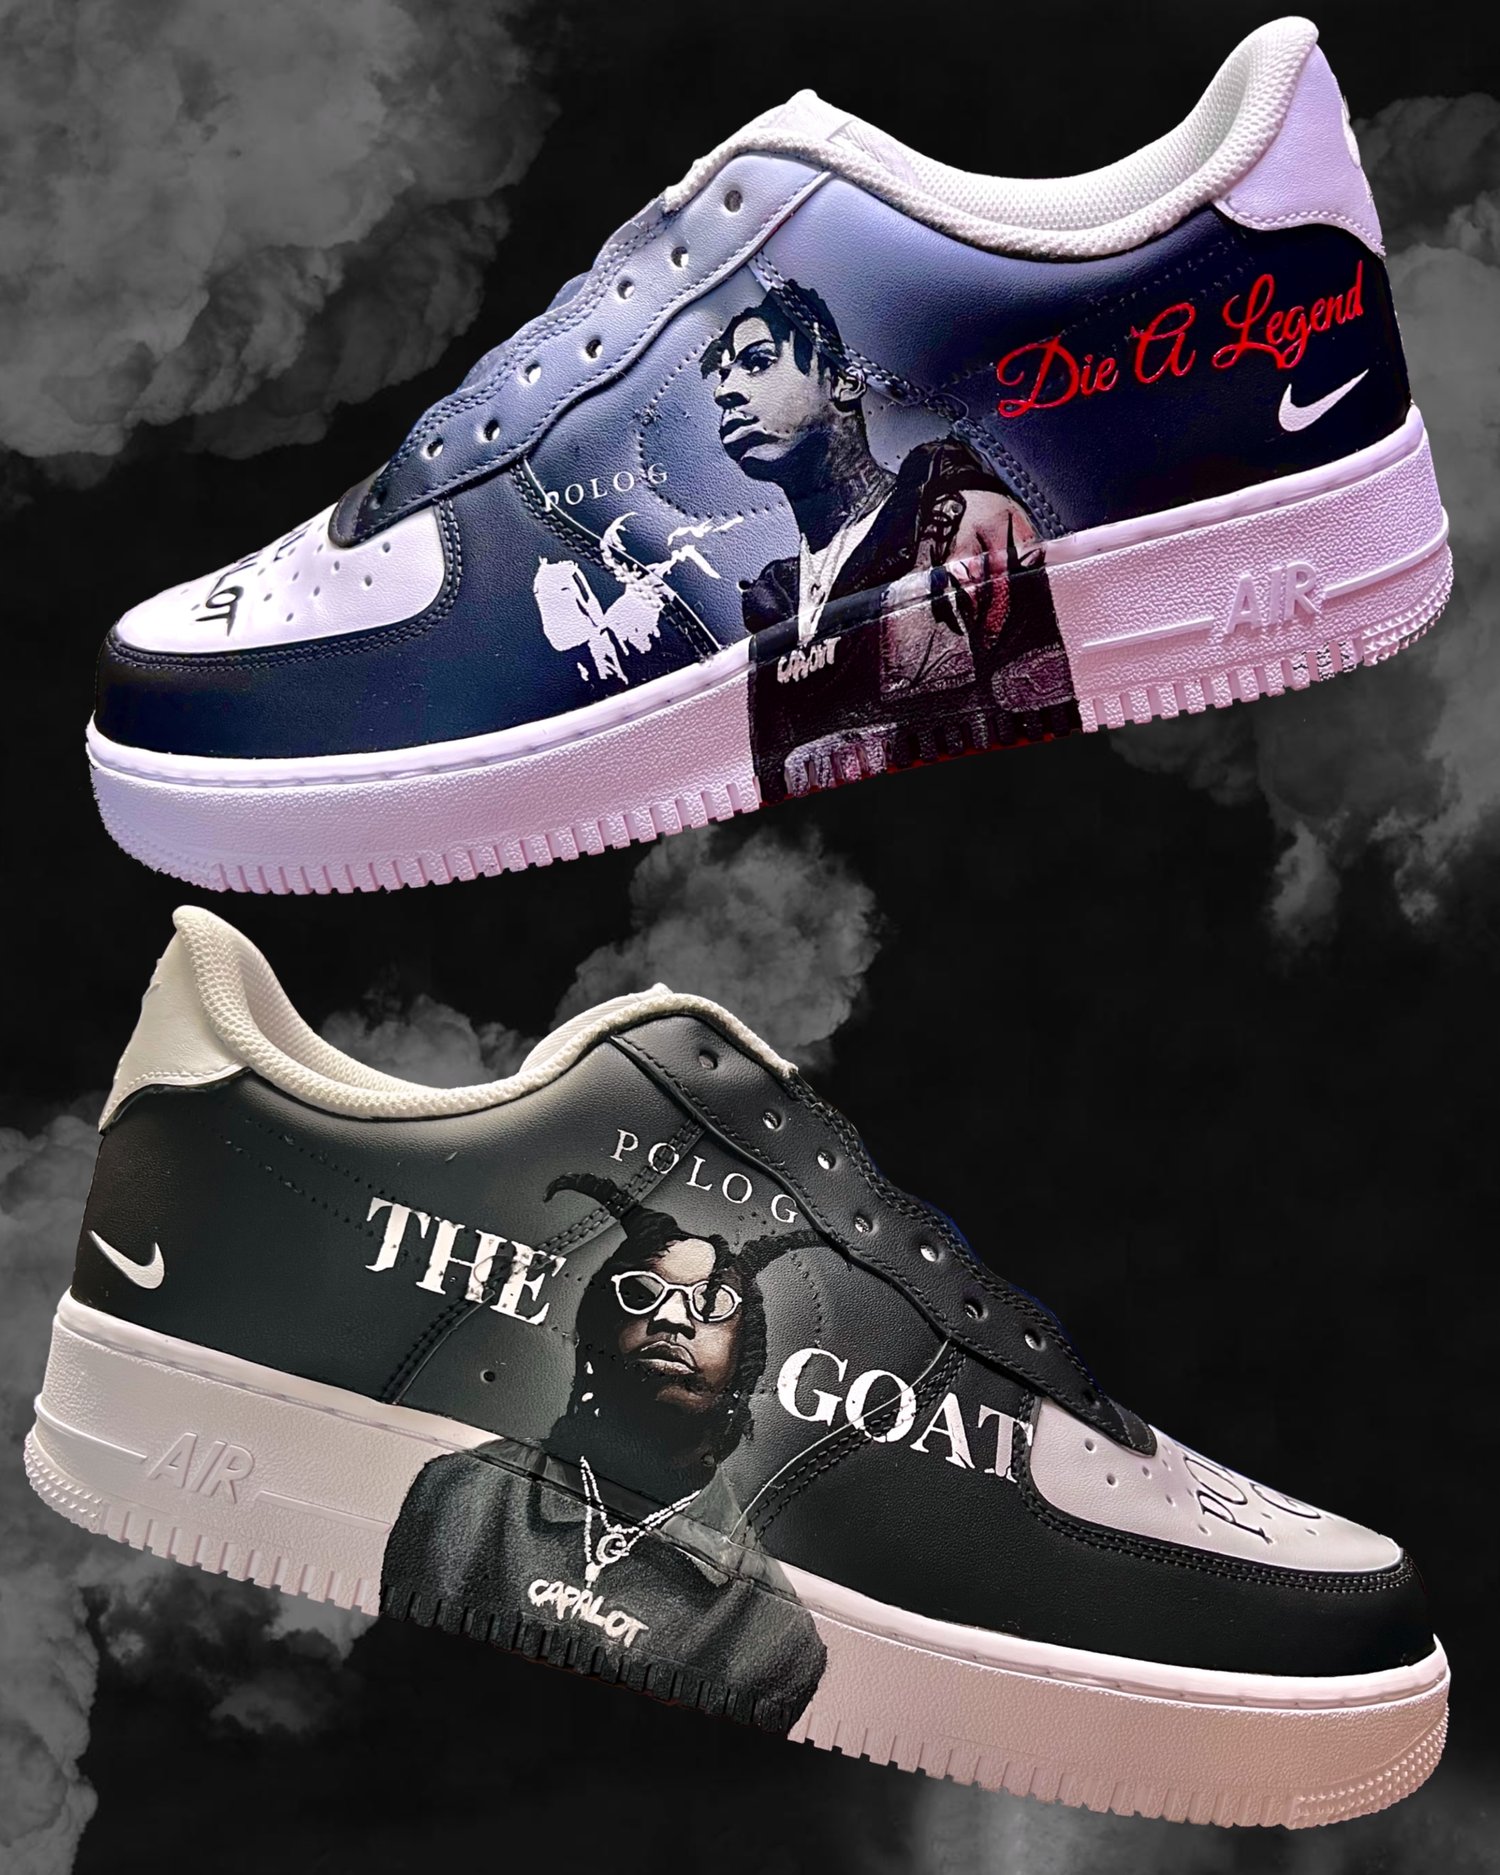 Custom Polo G Lil Capalot Nike Air Force 1 '07 Low - “The Goat” / “Die a  Legend” — Q's Custom Sneakers